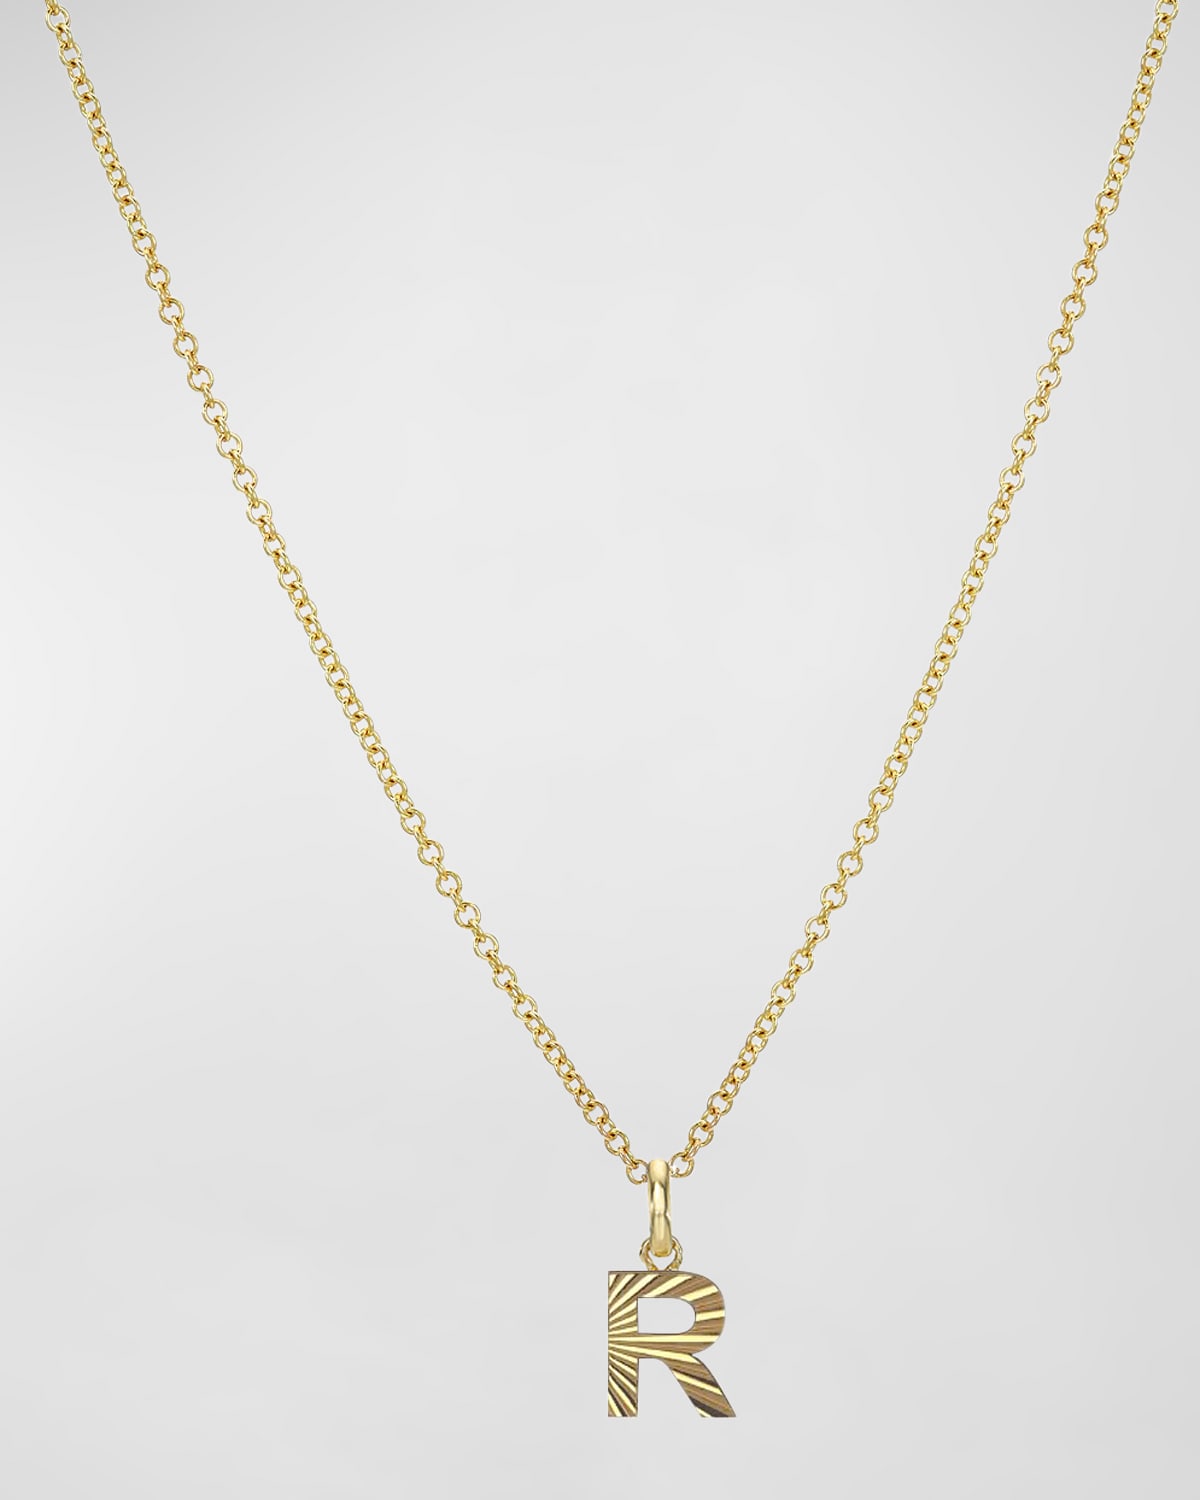 Zoe Lev Jewelry 14k Gold Initial Pendant Necklace In R